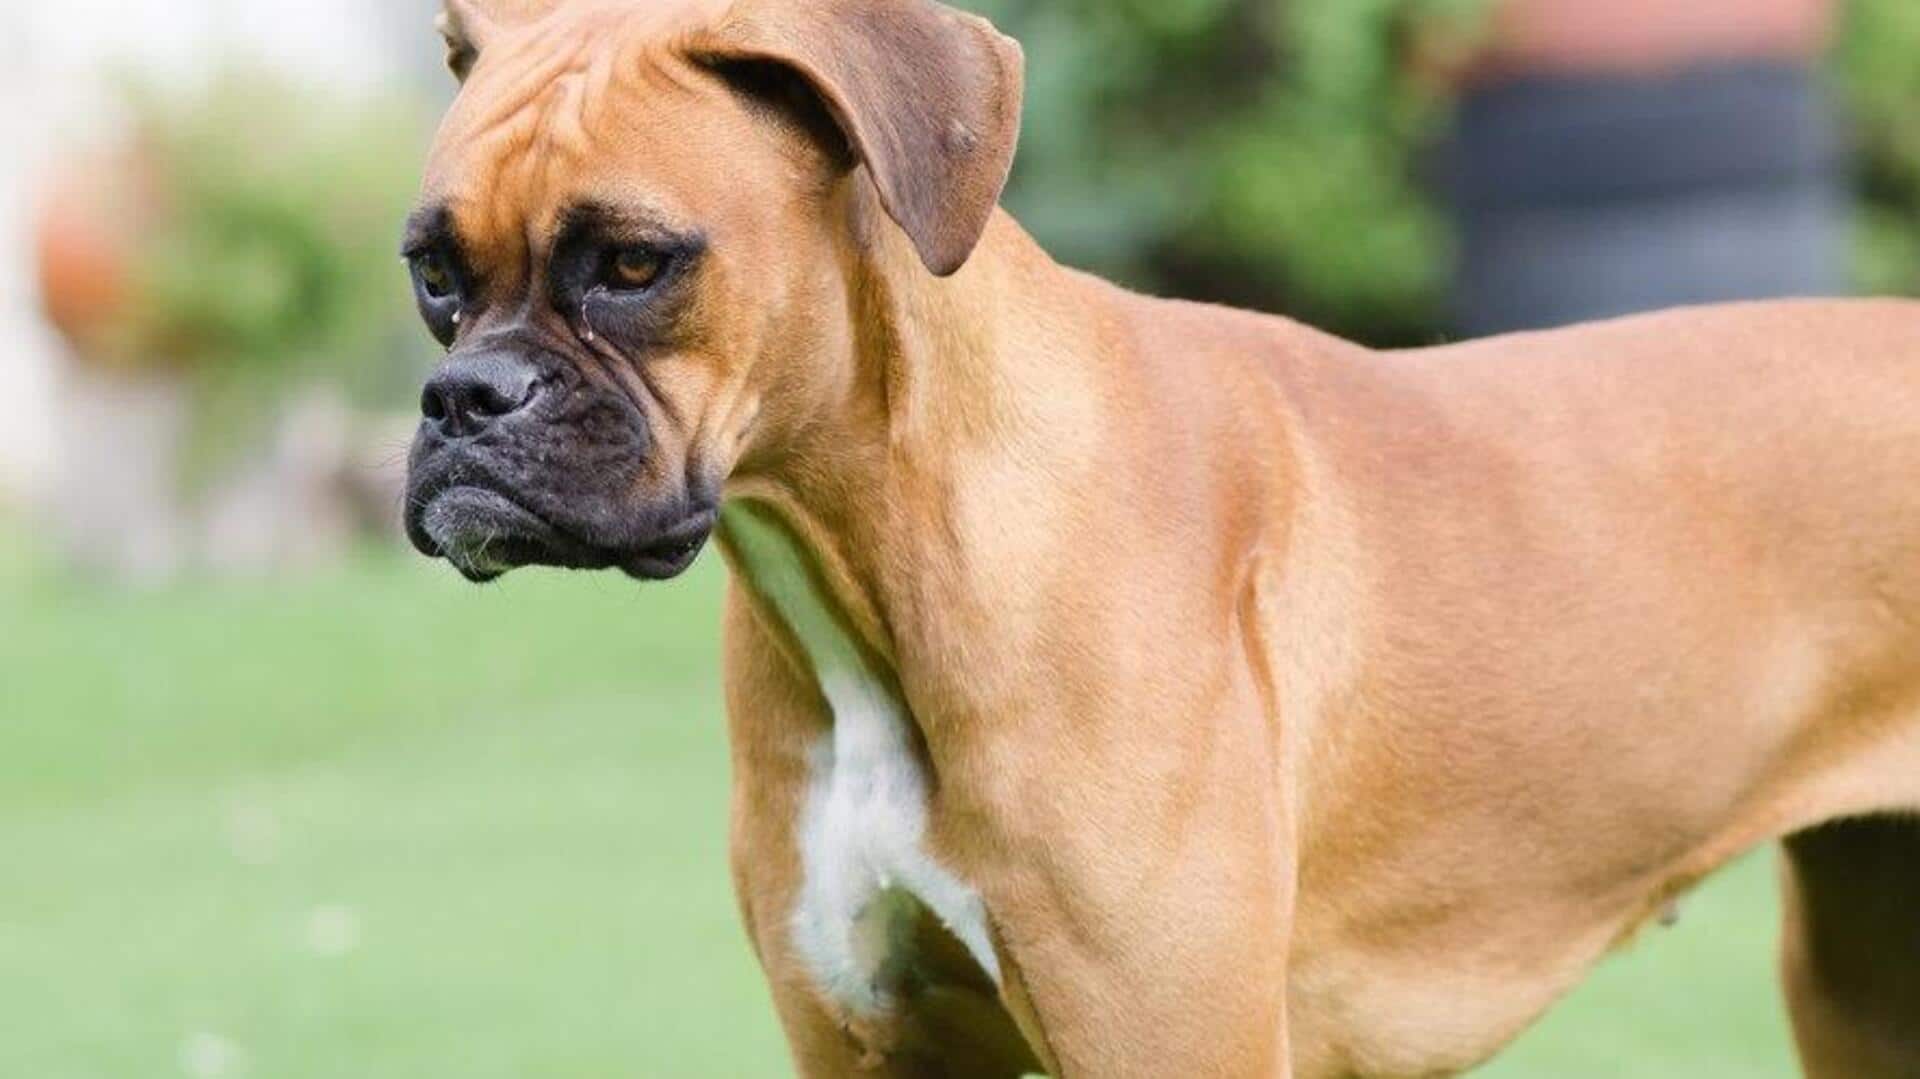 Boxer paw pad care guide: Take note of these tips